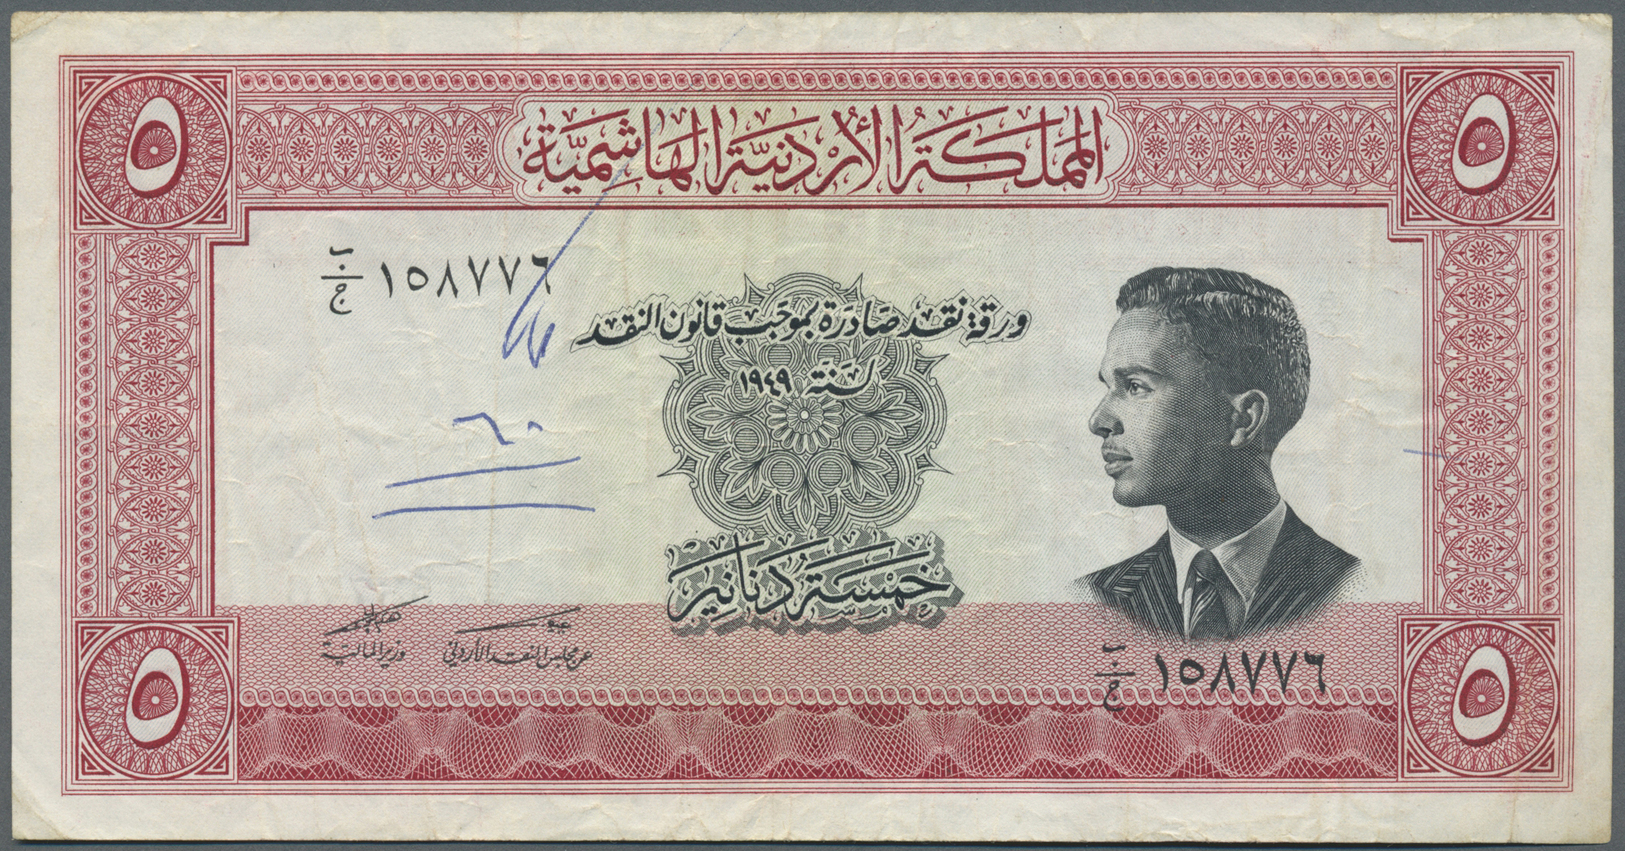 01320 Jordan / Jordanien: 5 Dinars L.1949 P. 7b, Used With Several Folds And Creases, A Pen Writing At Left On Front, No - Jordan